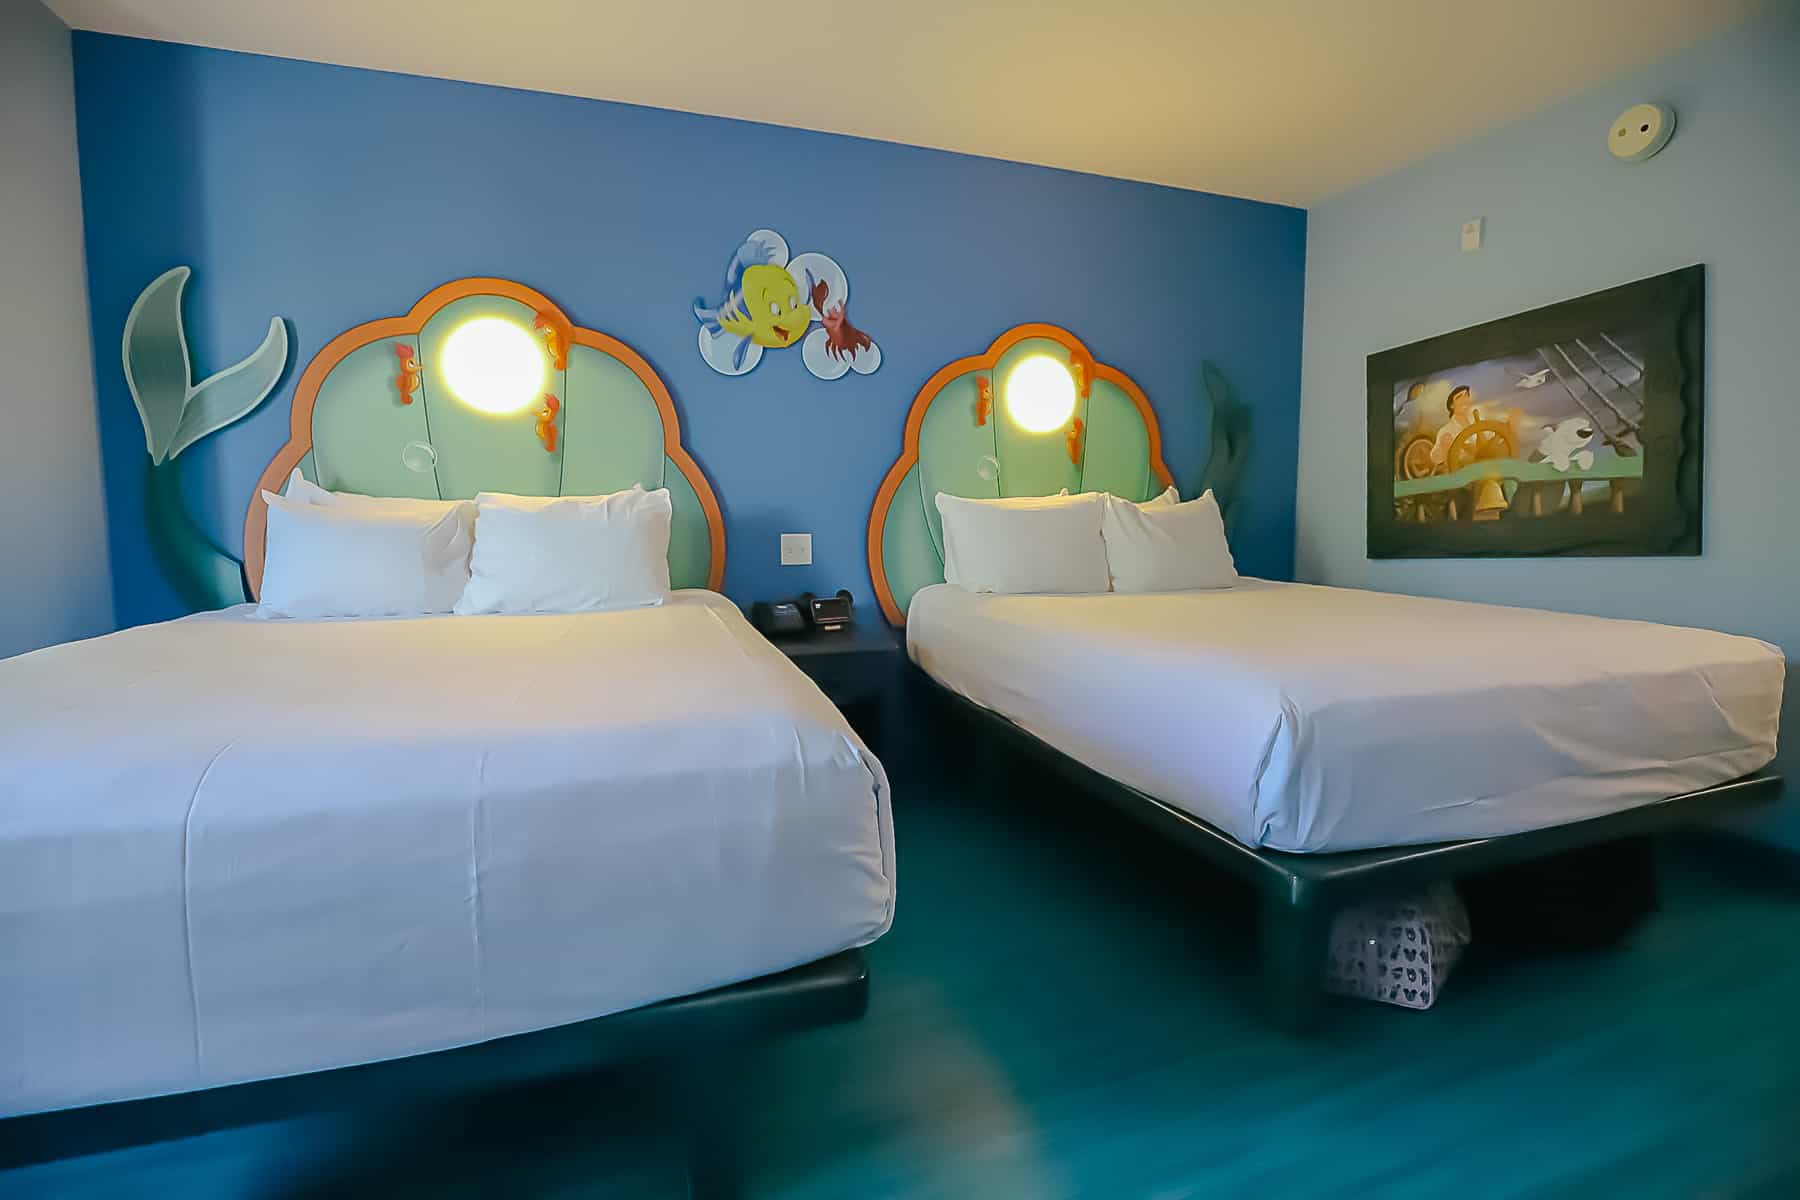 Shows two queen-size beds in the room. 